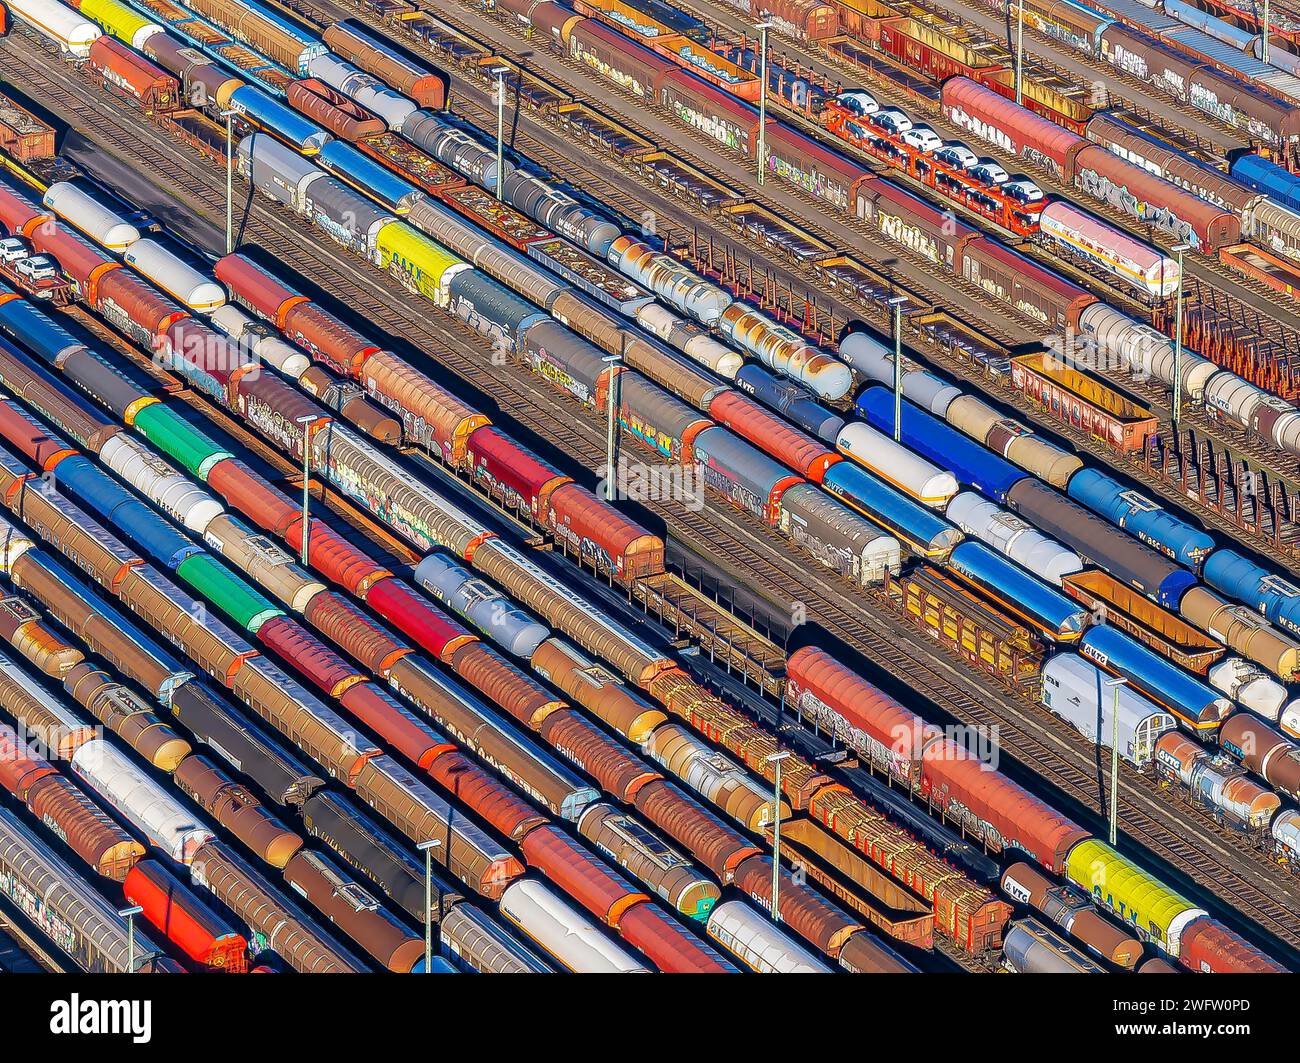 Deutsche Bahn AG marshalling yard. Many goods trains are parked on the tracks with tank wagons, car transporters and other wagons, companies Stock Photo